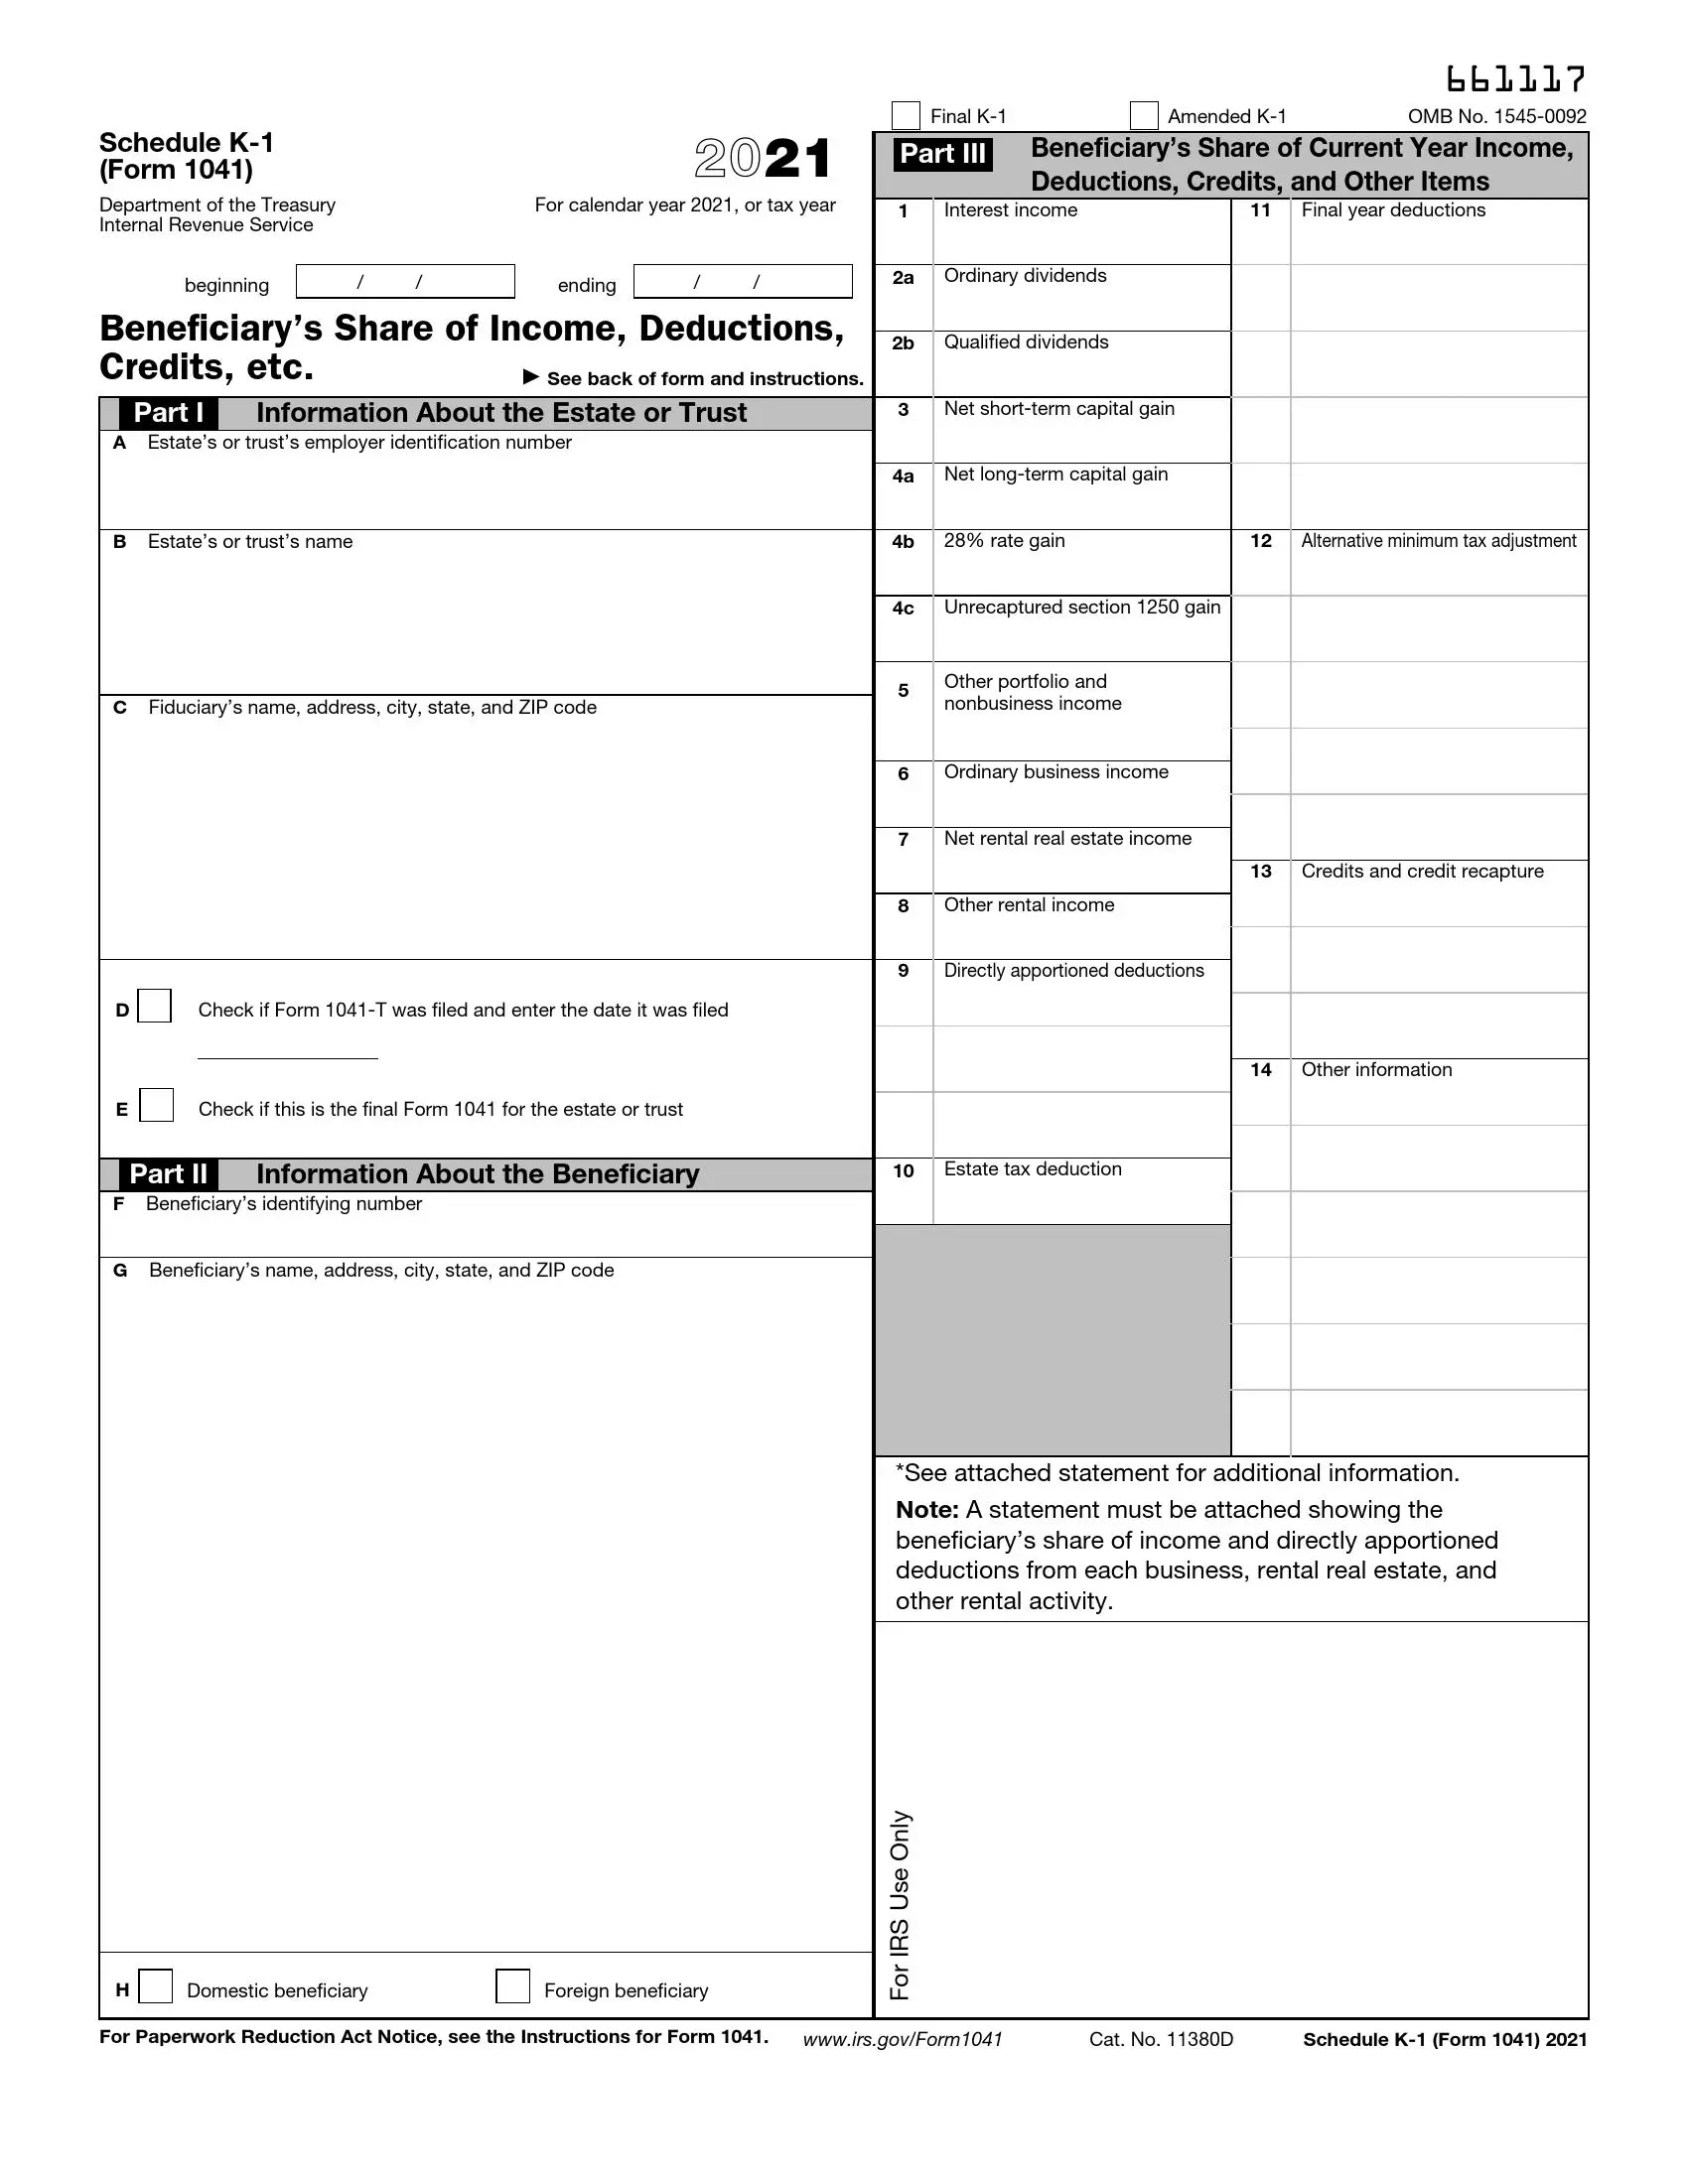 irs schedule k-1 form 1041 2021 preview